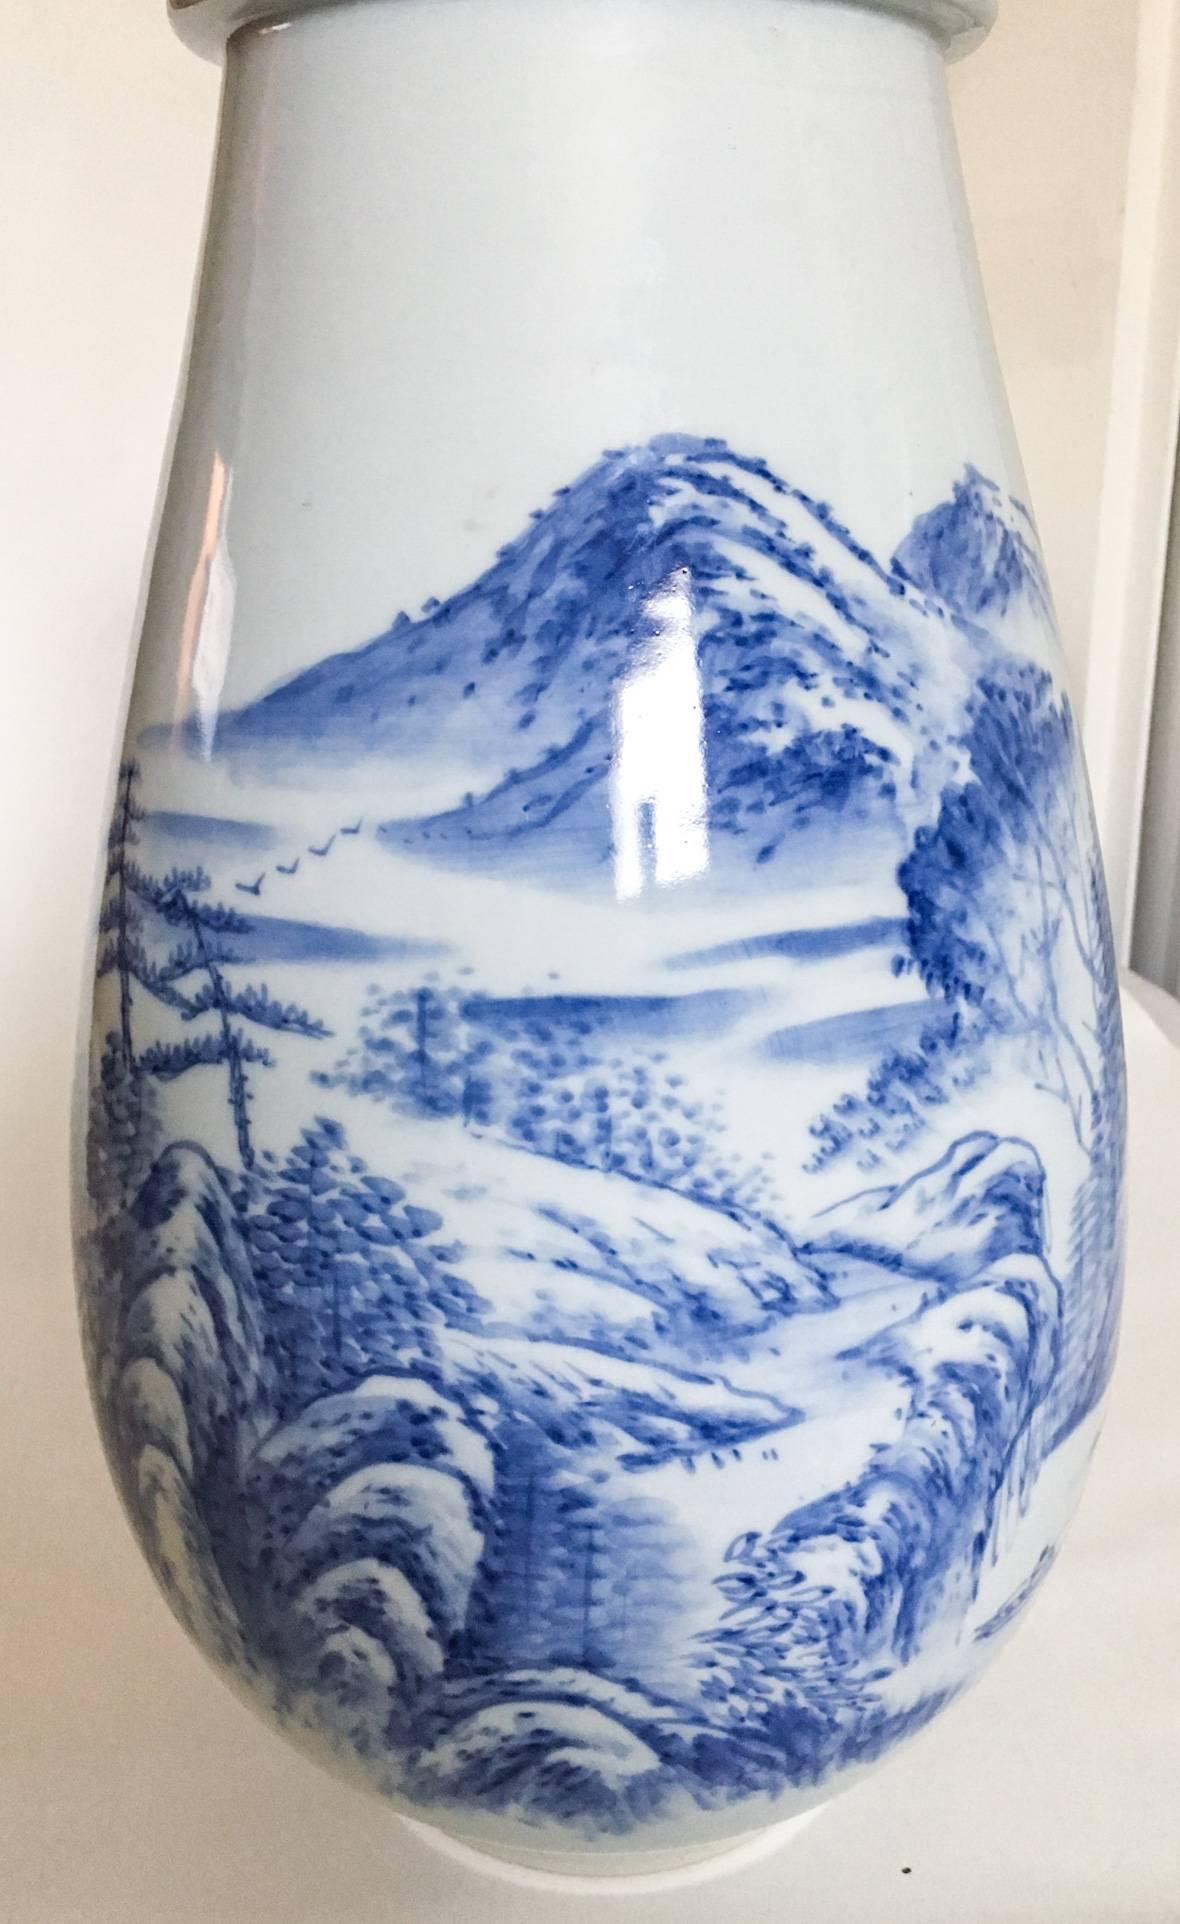 Offered is a substantial hand-thrown tall export ceramic vase, decorated with hand-painted cobalt blue motifs of mountains and trees along a river with a fisherman against a very pale robin's egg blue ground. Vase is marked with Chinese characters